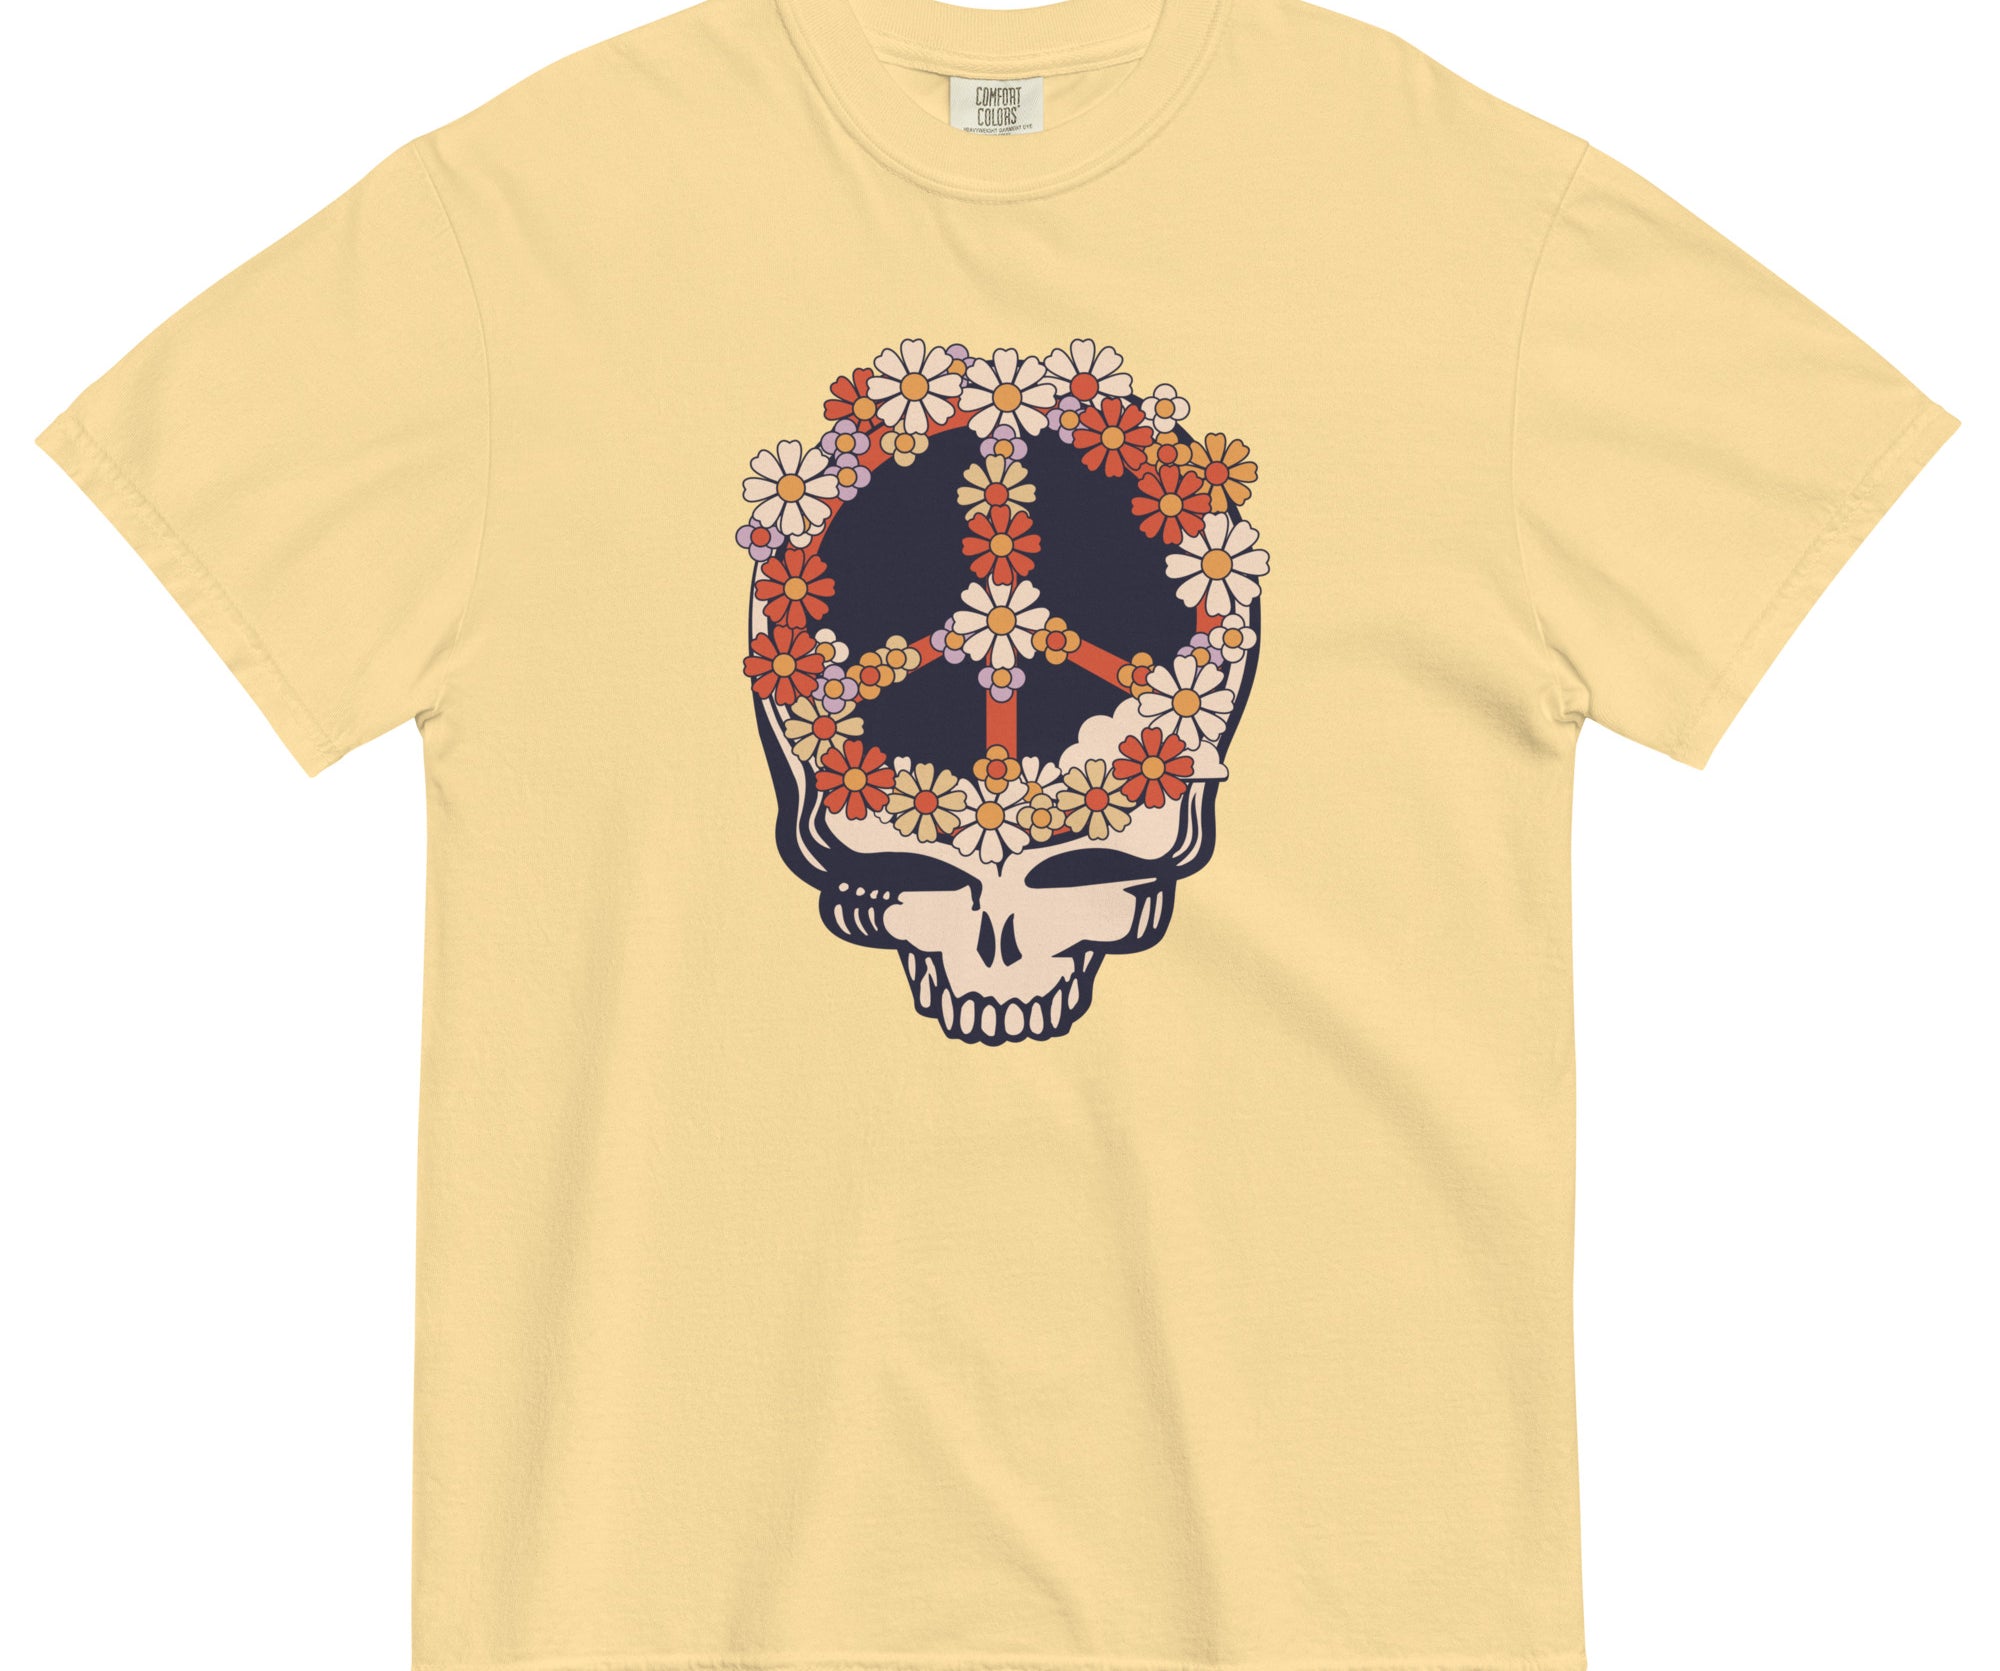 Grateful Dead | Pigment Dye Oversize Cotton Tee | Flowers in Her Hair - Section 119